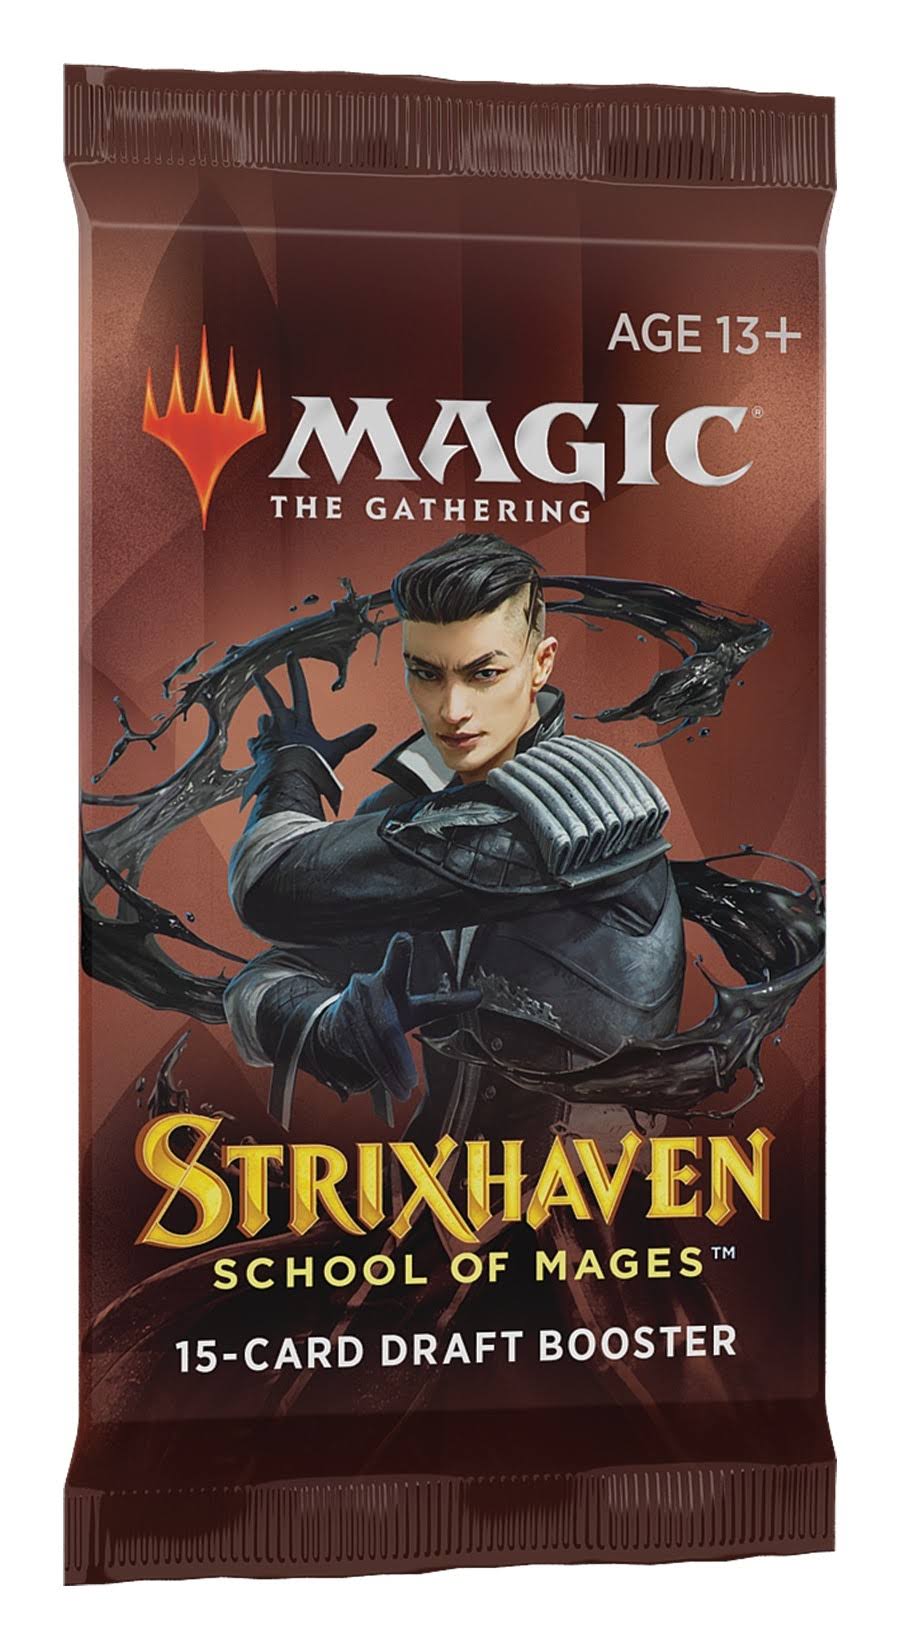 Magic The Gathering - Strixhaven School of Mages Draft Booster